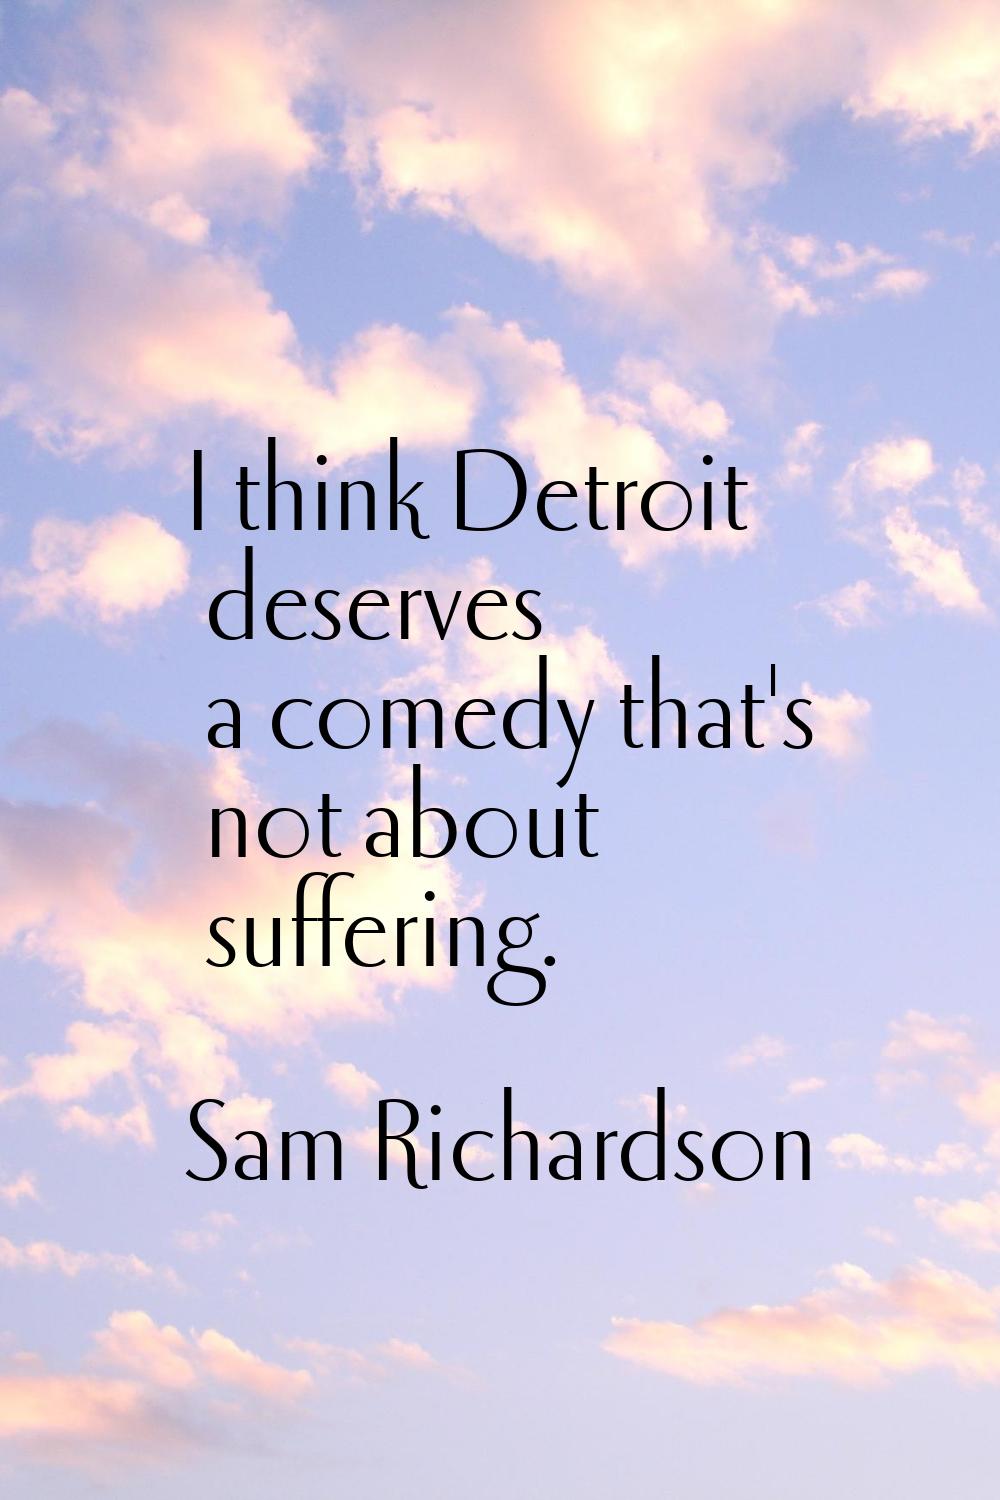 I think Detroit deserves a comedy that's not about suffering.